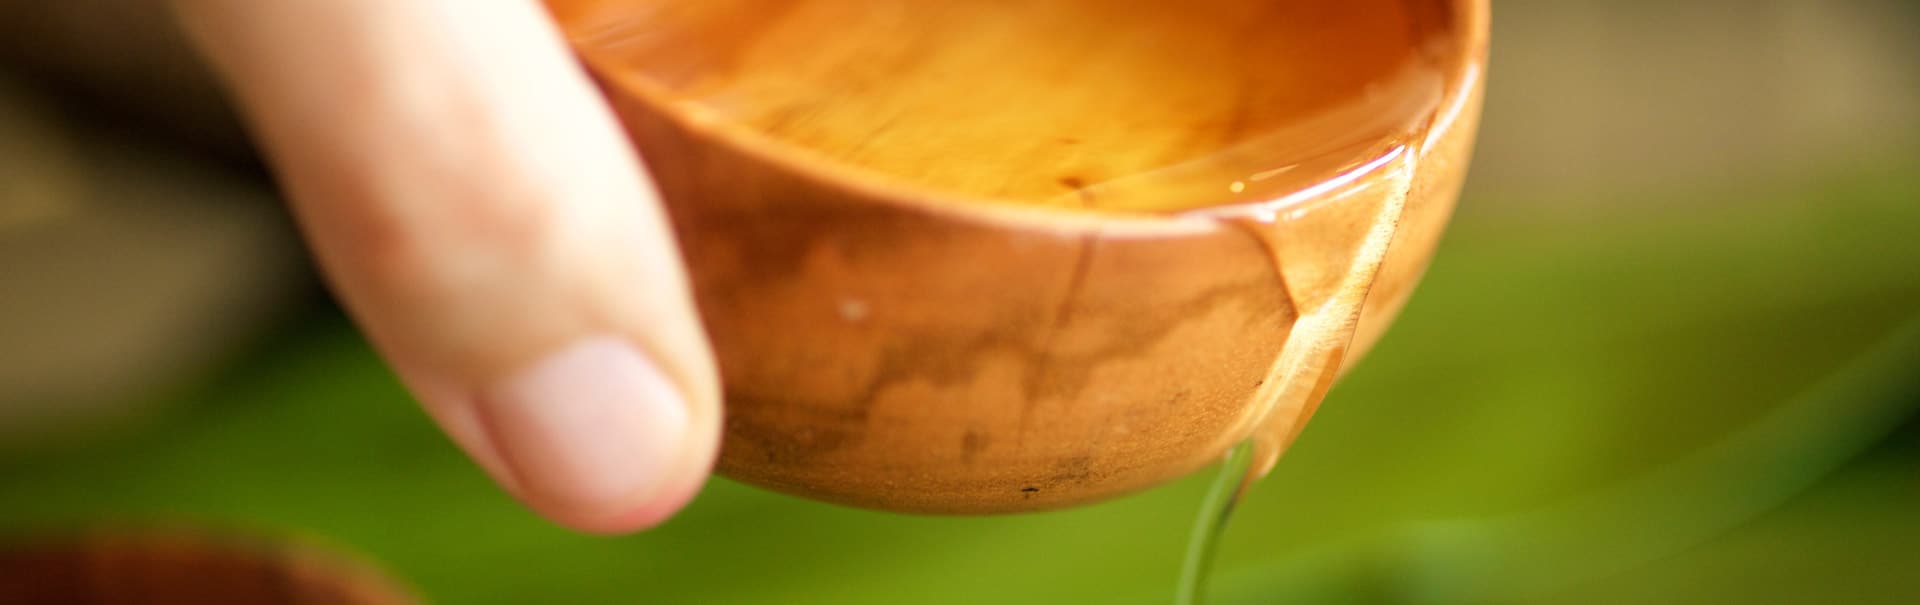 Oil pouring from a monekypod bowl